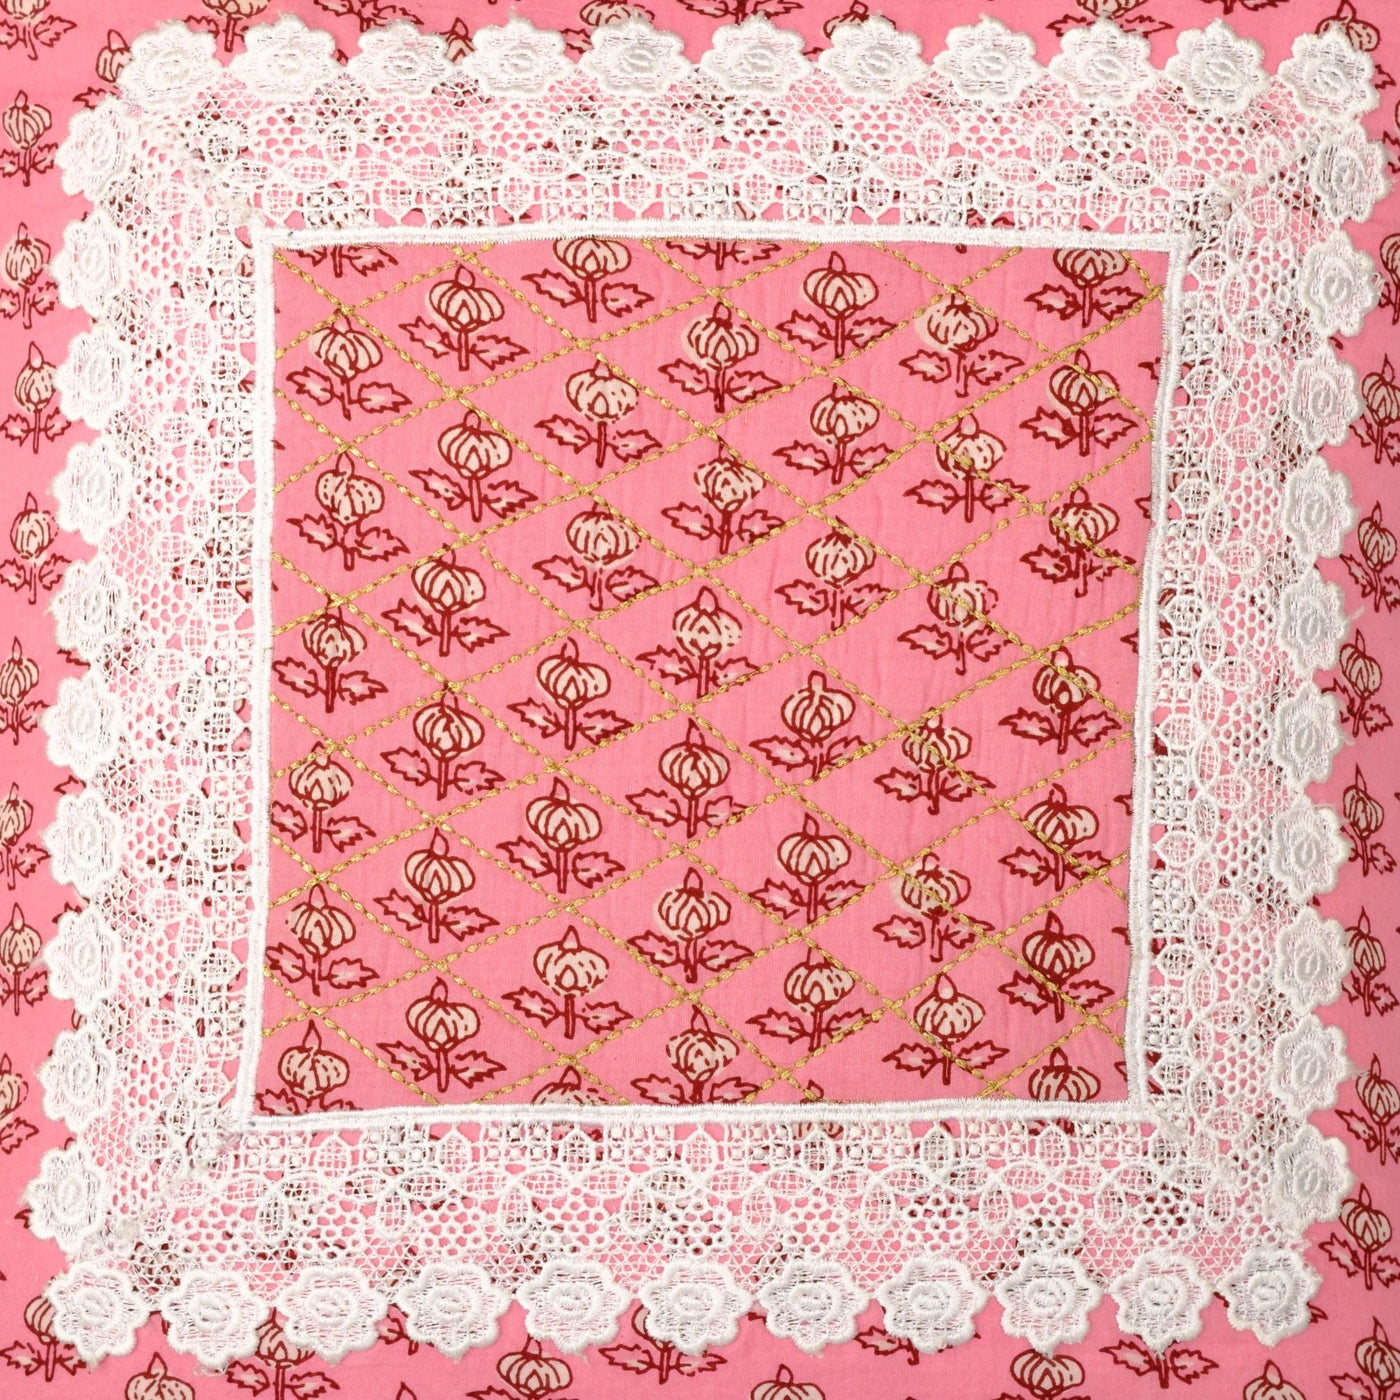 The Fabricrush  Pillowcases & Shams Lace Quilted Pink Pillow Cushion Cover